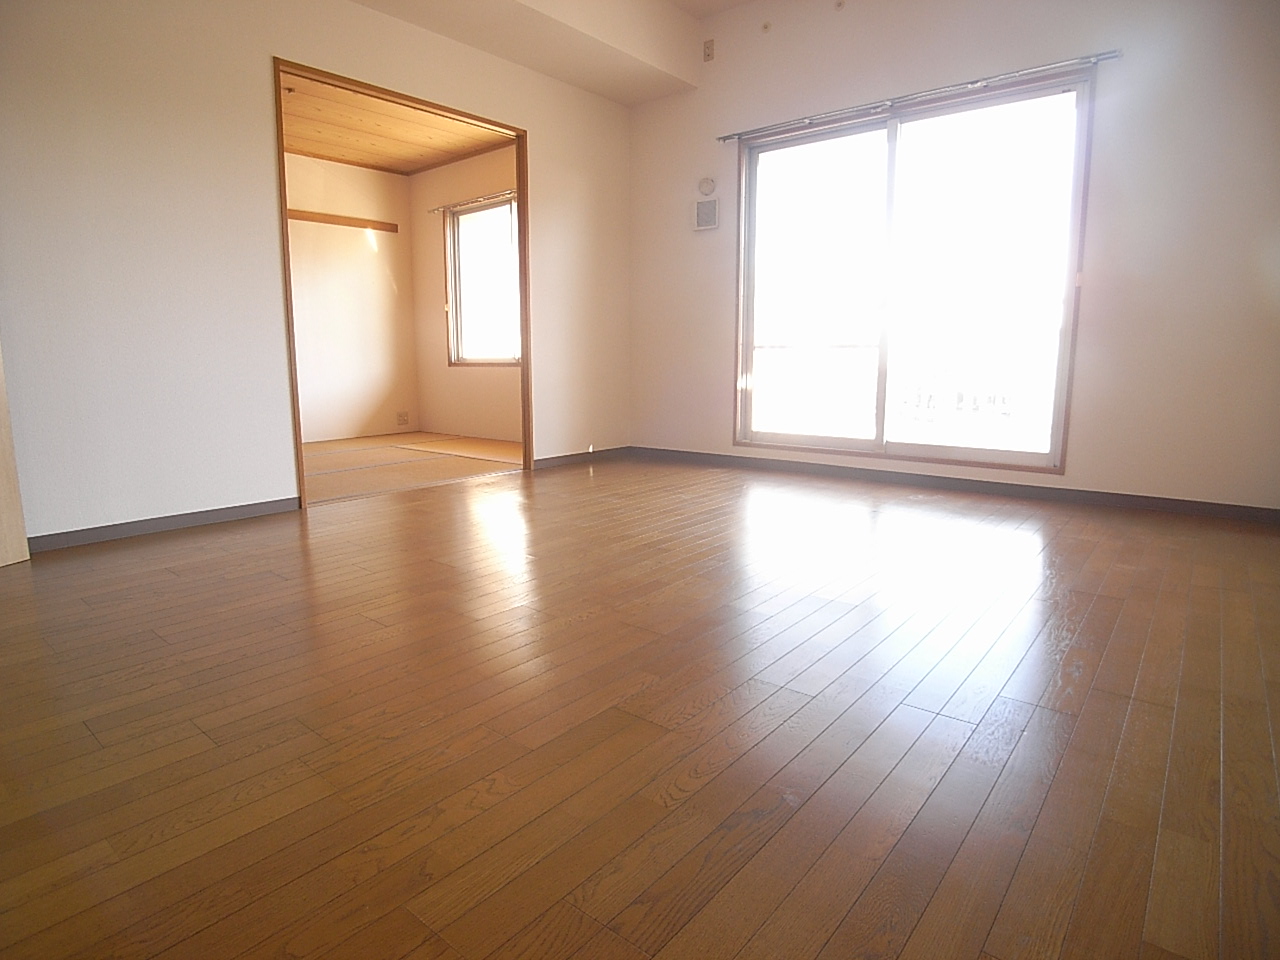 Other. Spacious living room. Because the corner room is a bright room